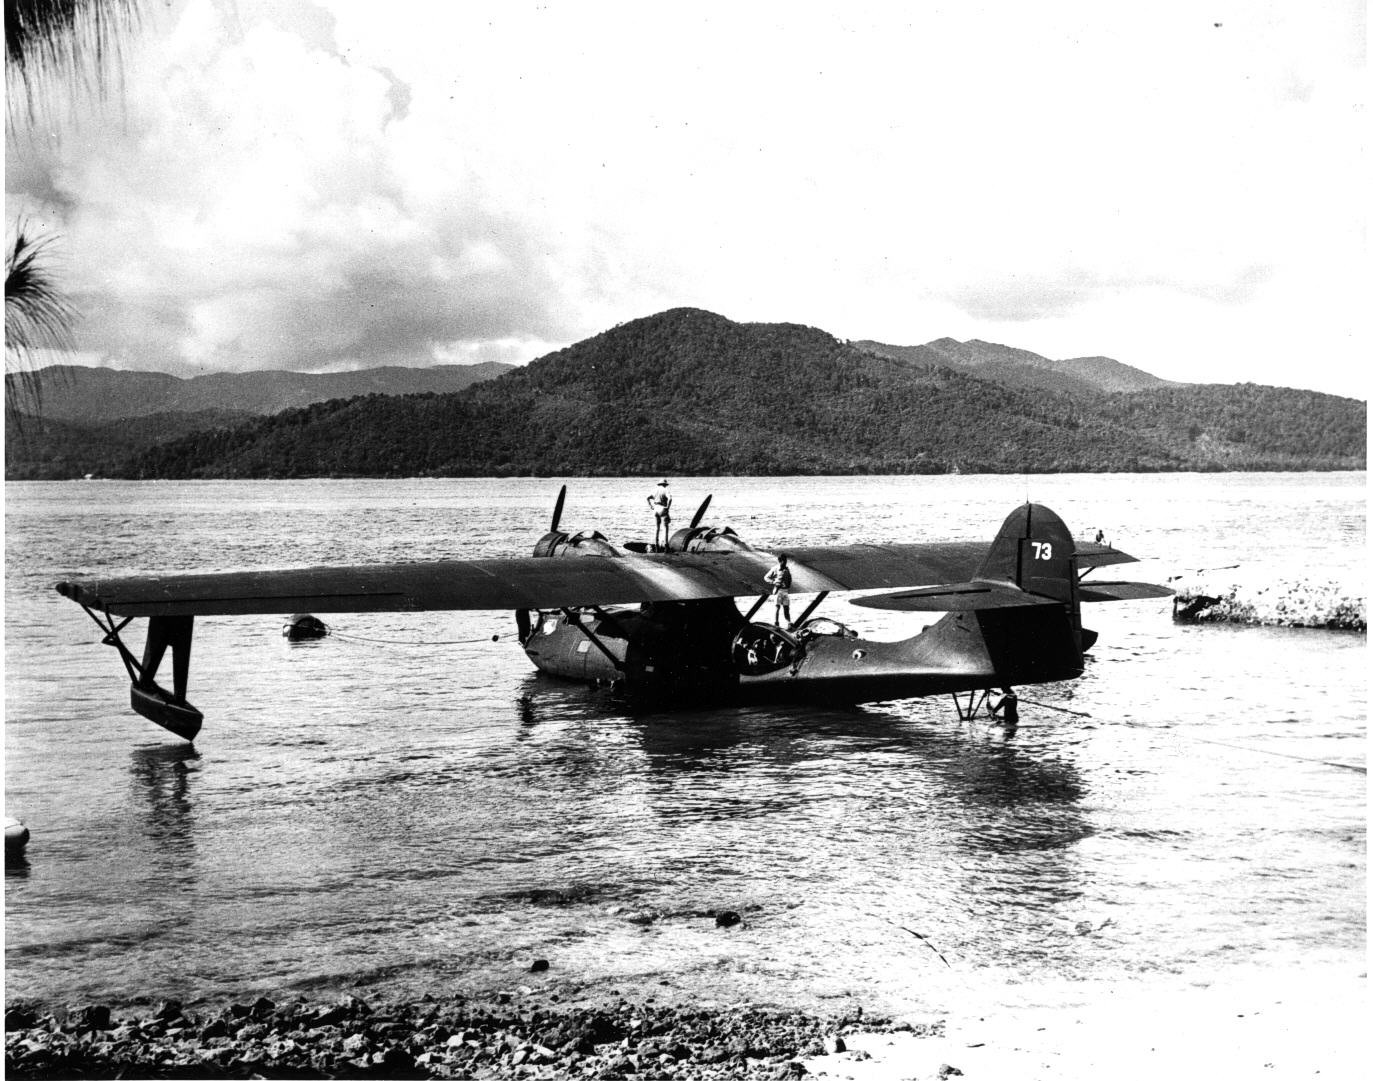 A PBY-5 Catalina of Patrol Squadron 34, one of the “Black Cats” night patrol squadrons, at rest at Samarai Island, New Guinea, Jan-Feb 1944. Note the absence of any markings beyond the squadron patch on the bow and the side number on the tail.